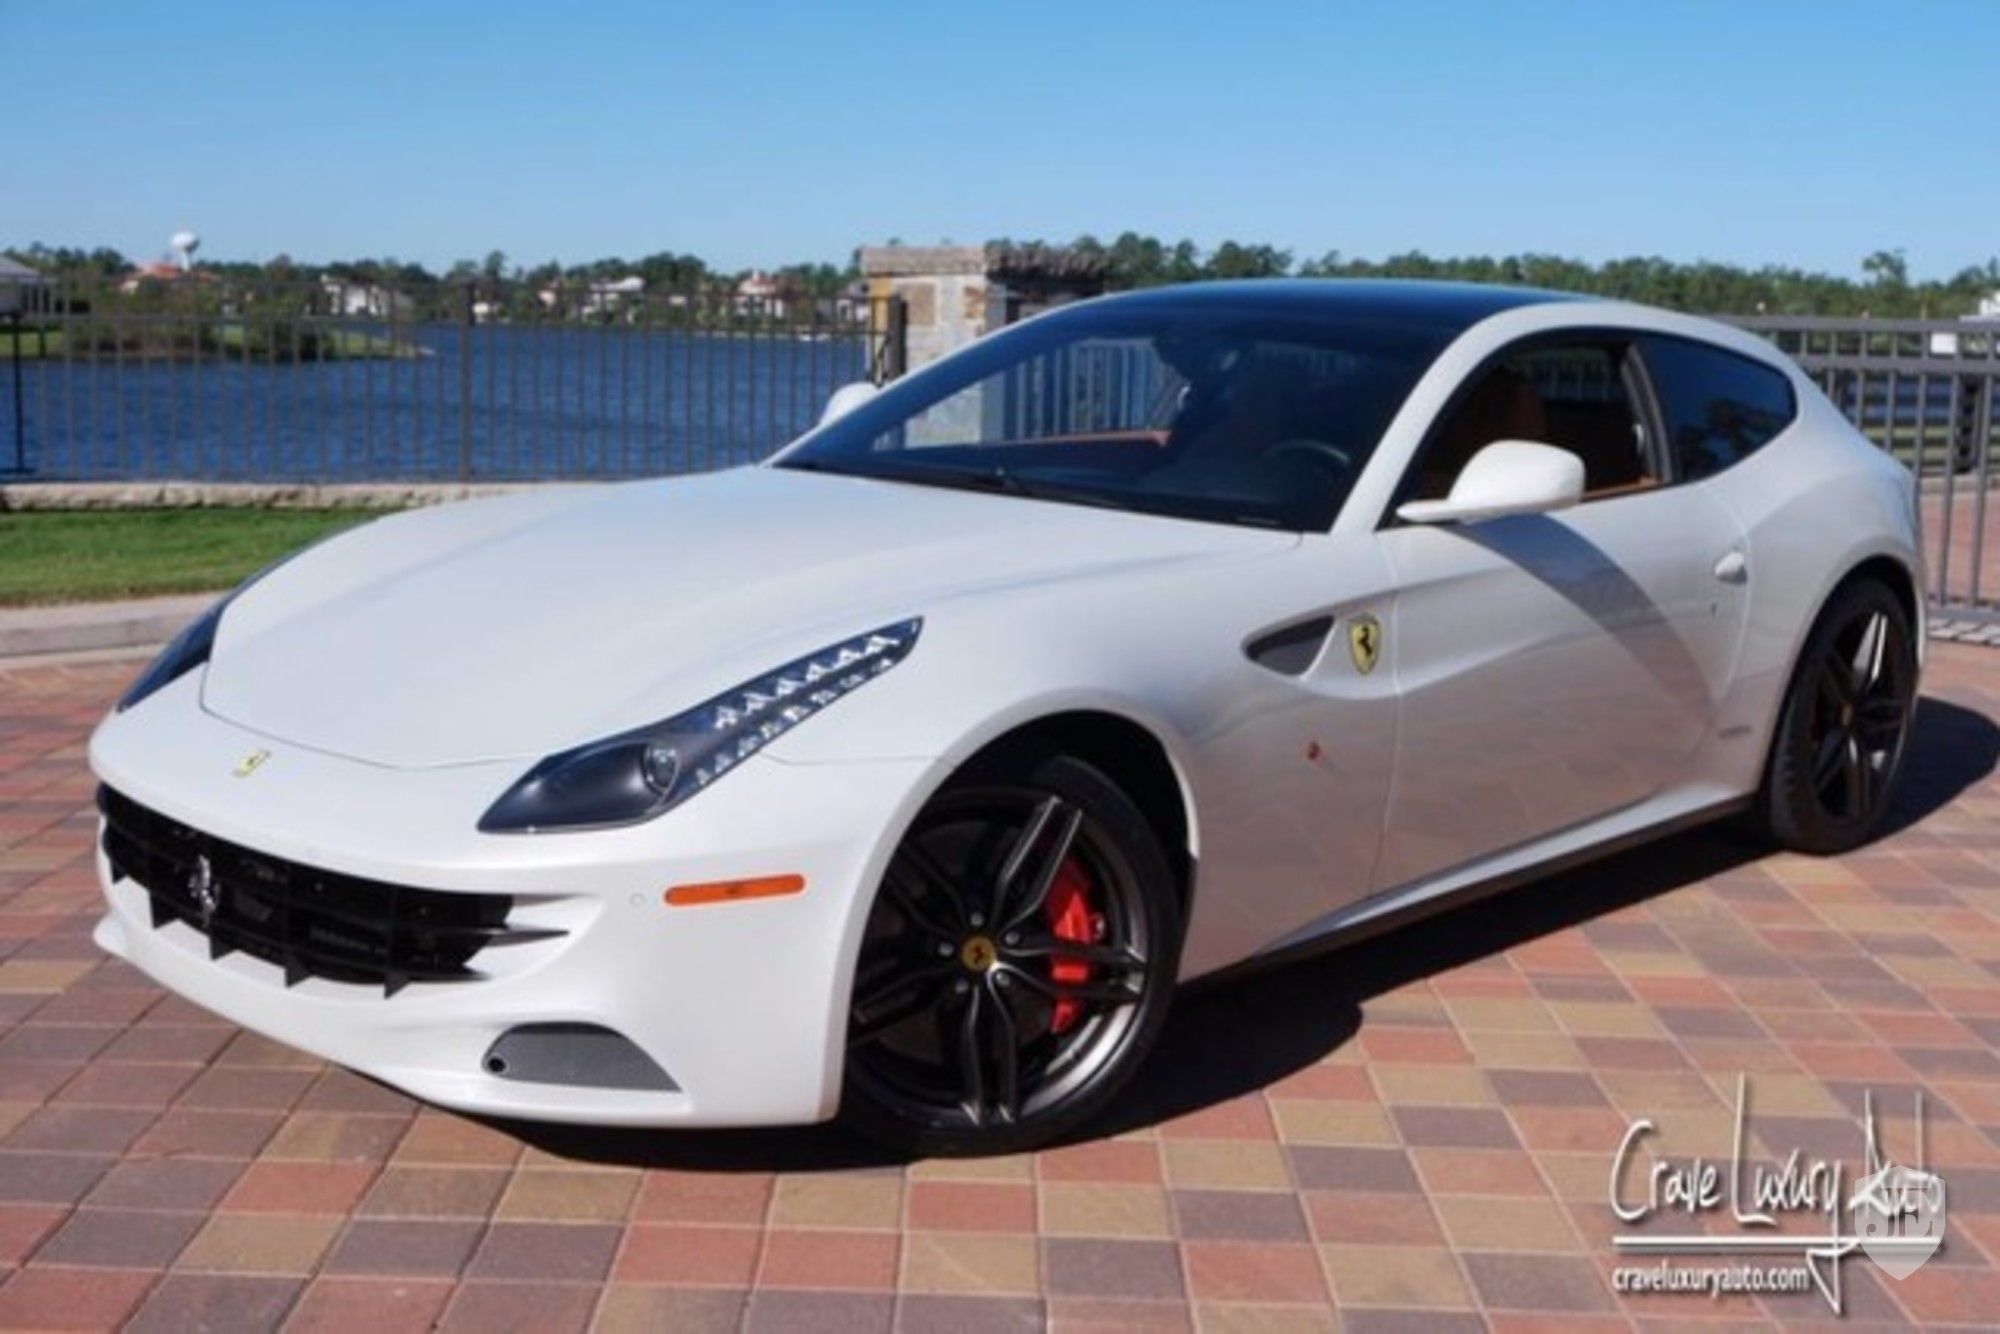 2015 Ferrari FF in the woodlands United States for sale on JamesEdition